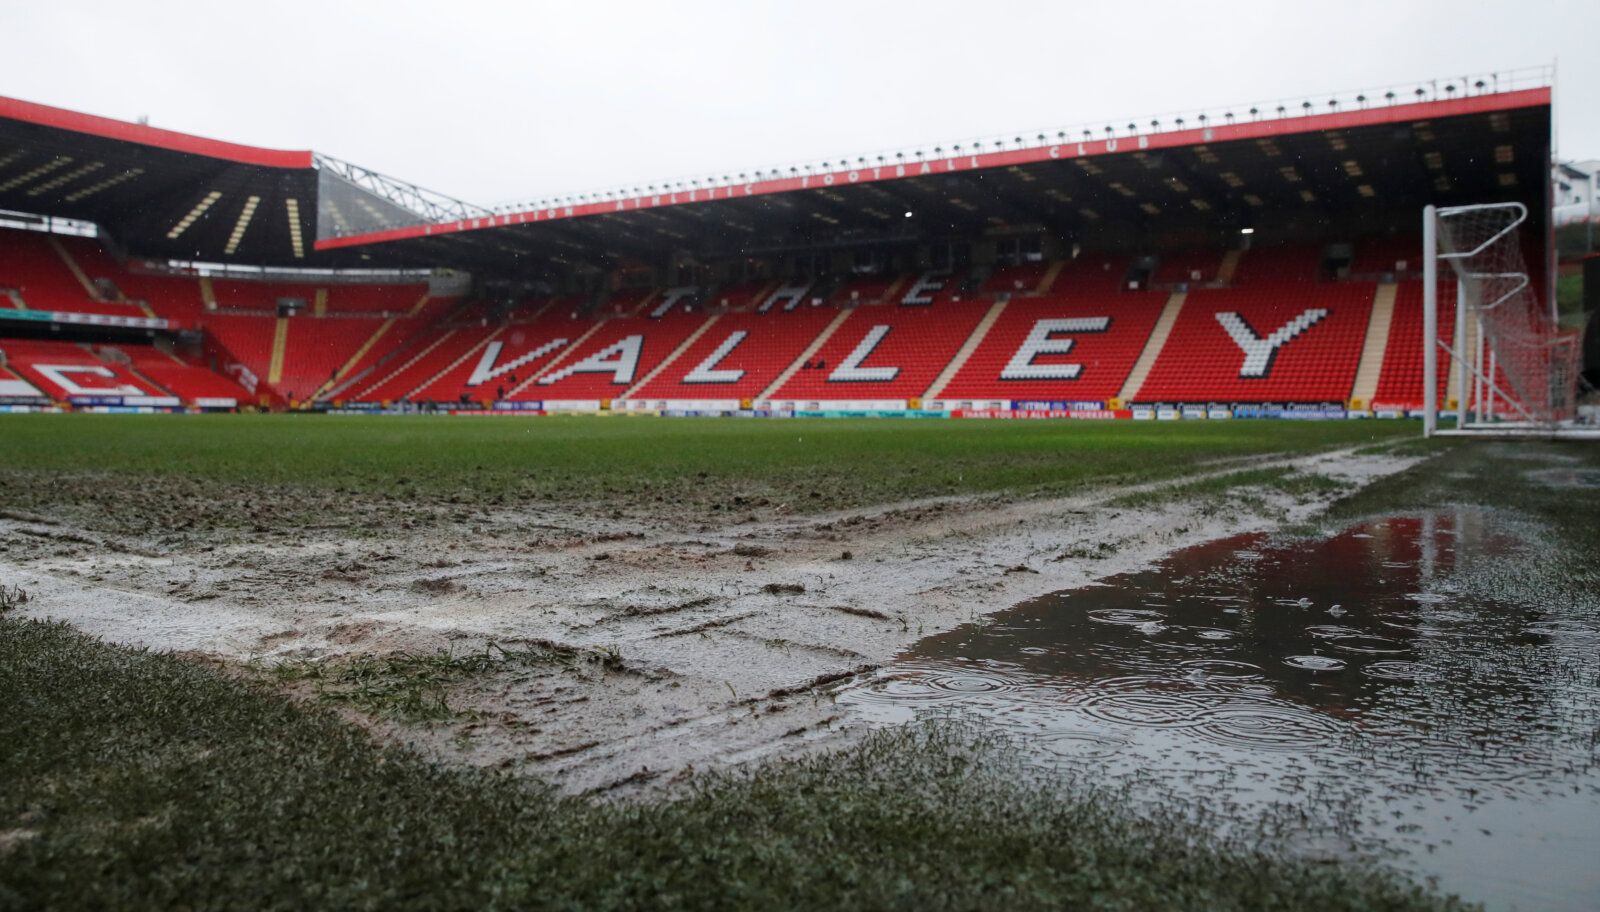 Soccer Football - League One - Charlton Athletic v Portsmouth - The Valley, London, Britain - January 30, 2021  General view of the pitch at The Valley as the game is called off because of a waterlogged pitch  Action Images/Andrew Couldridge  EDITORIAL USE ONLY. No use with unauthorized audio, video, data, fixture lists, club/league logos or 